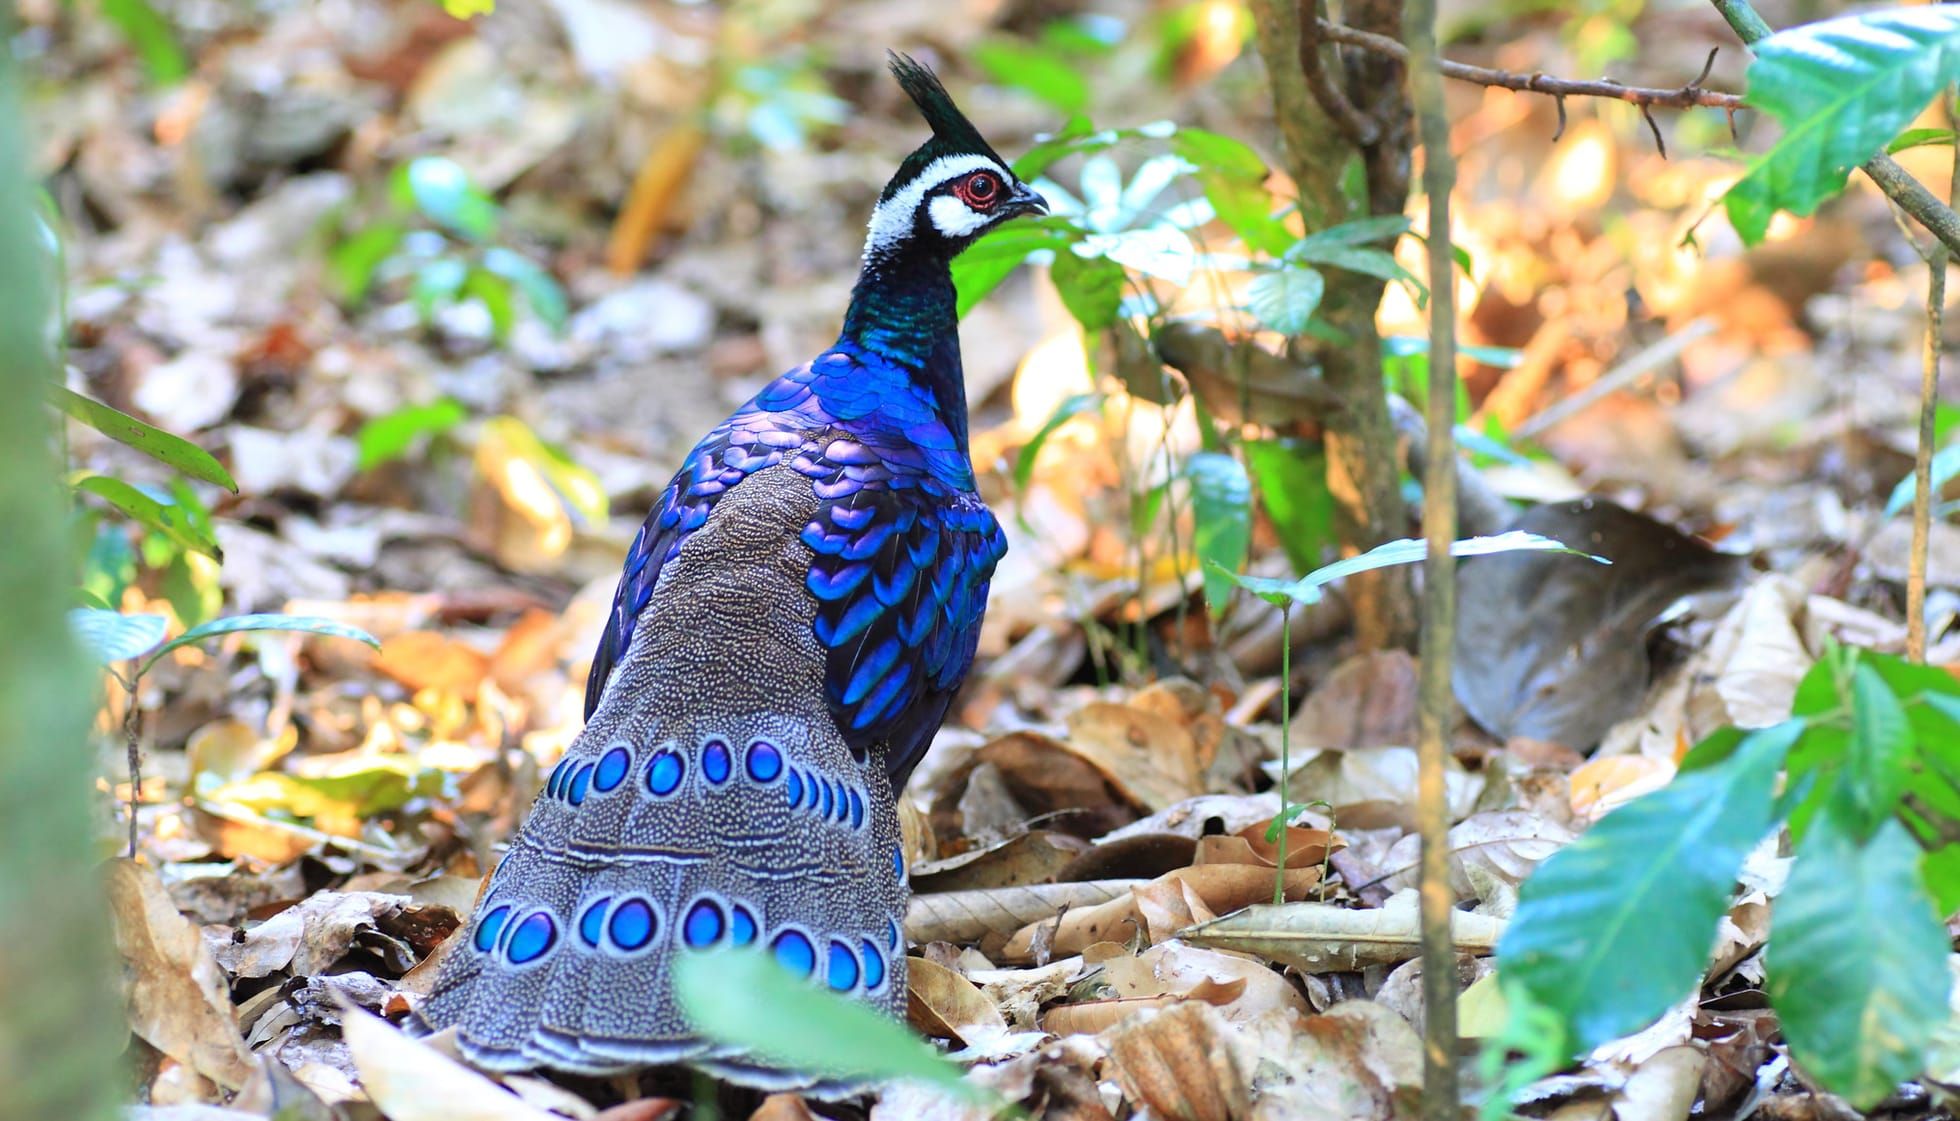  Palawan Peacock Pheasant in a forest